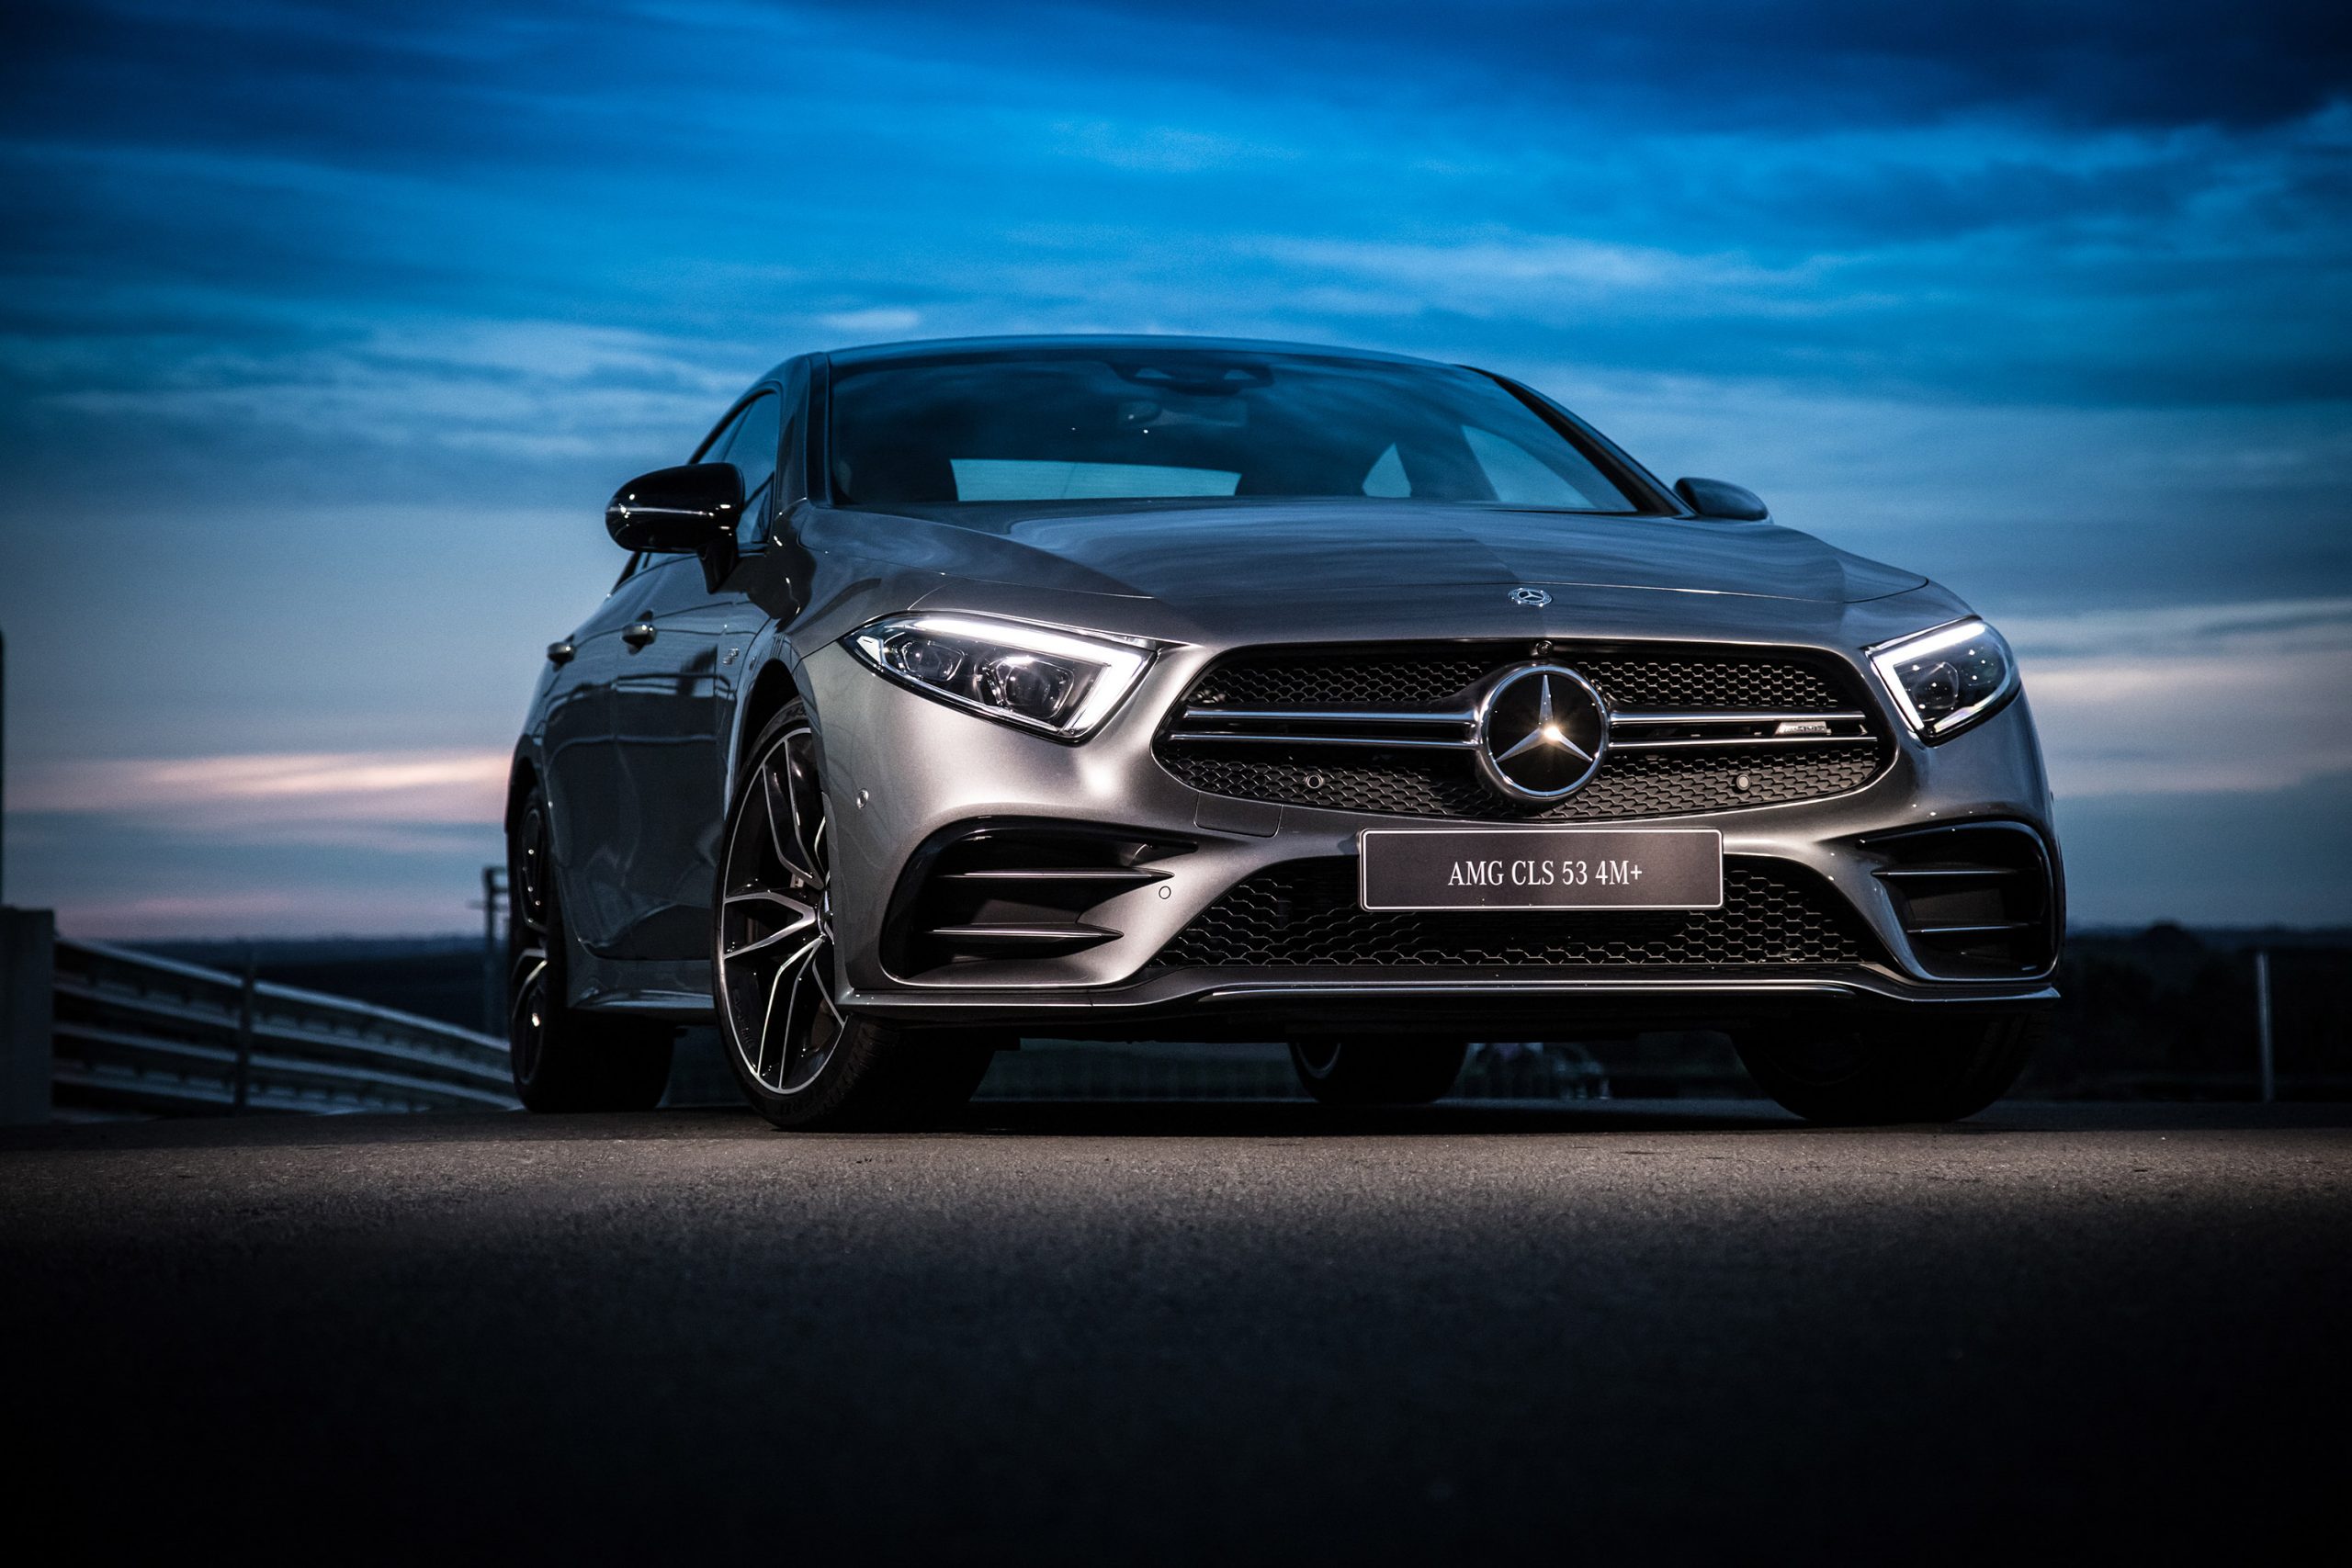 2019 Mercedes-Benz CLS 53 AMG Wallpapers | SuperCars.net